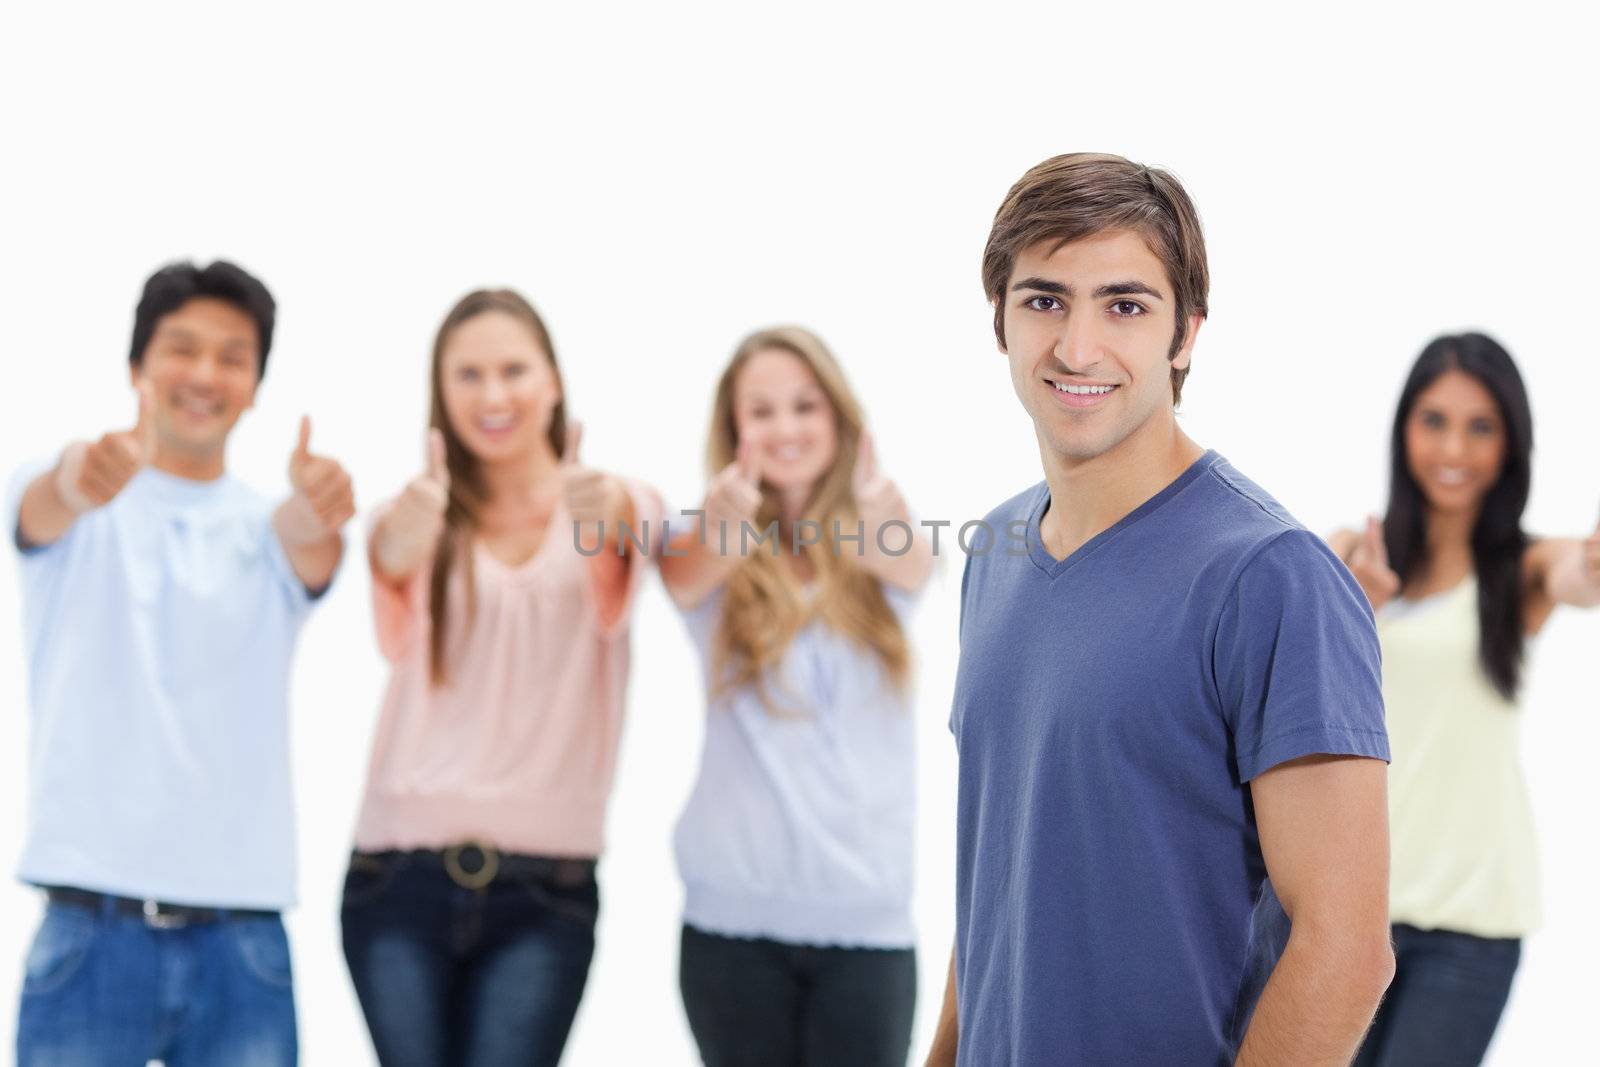 Man smiling with people approving behind him by Wavebreakmedia